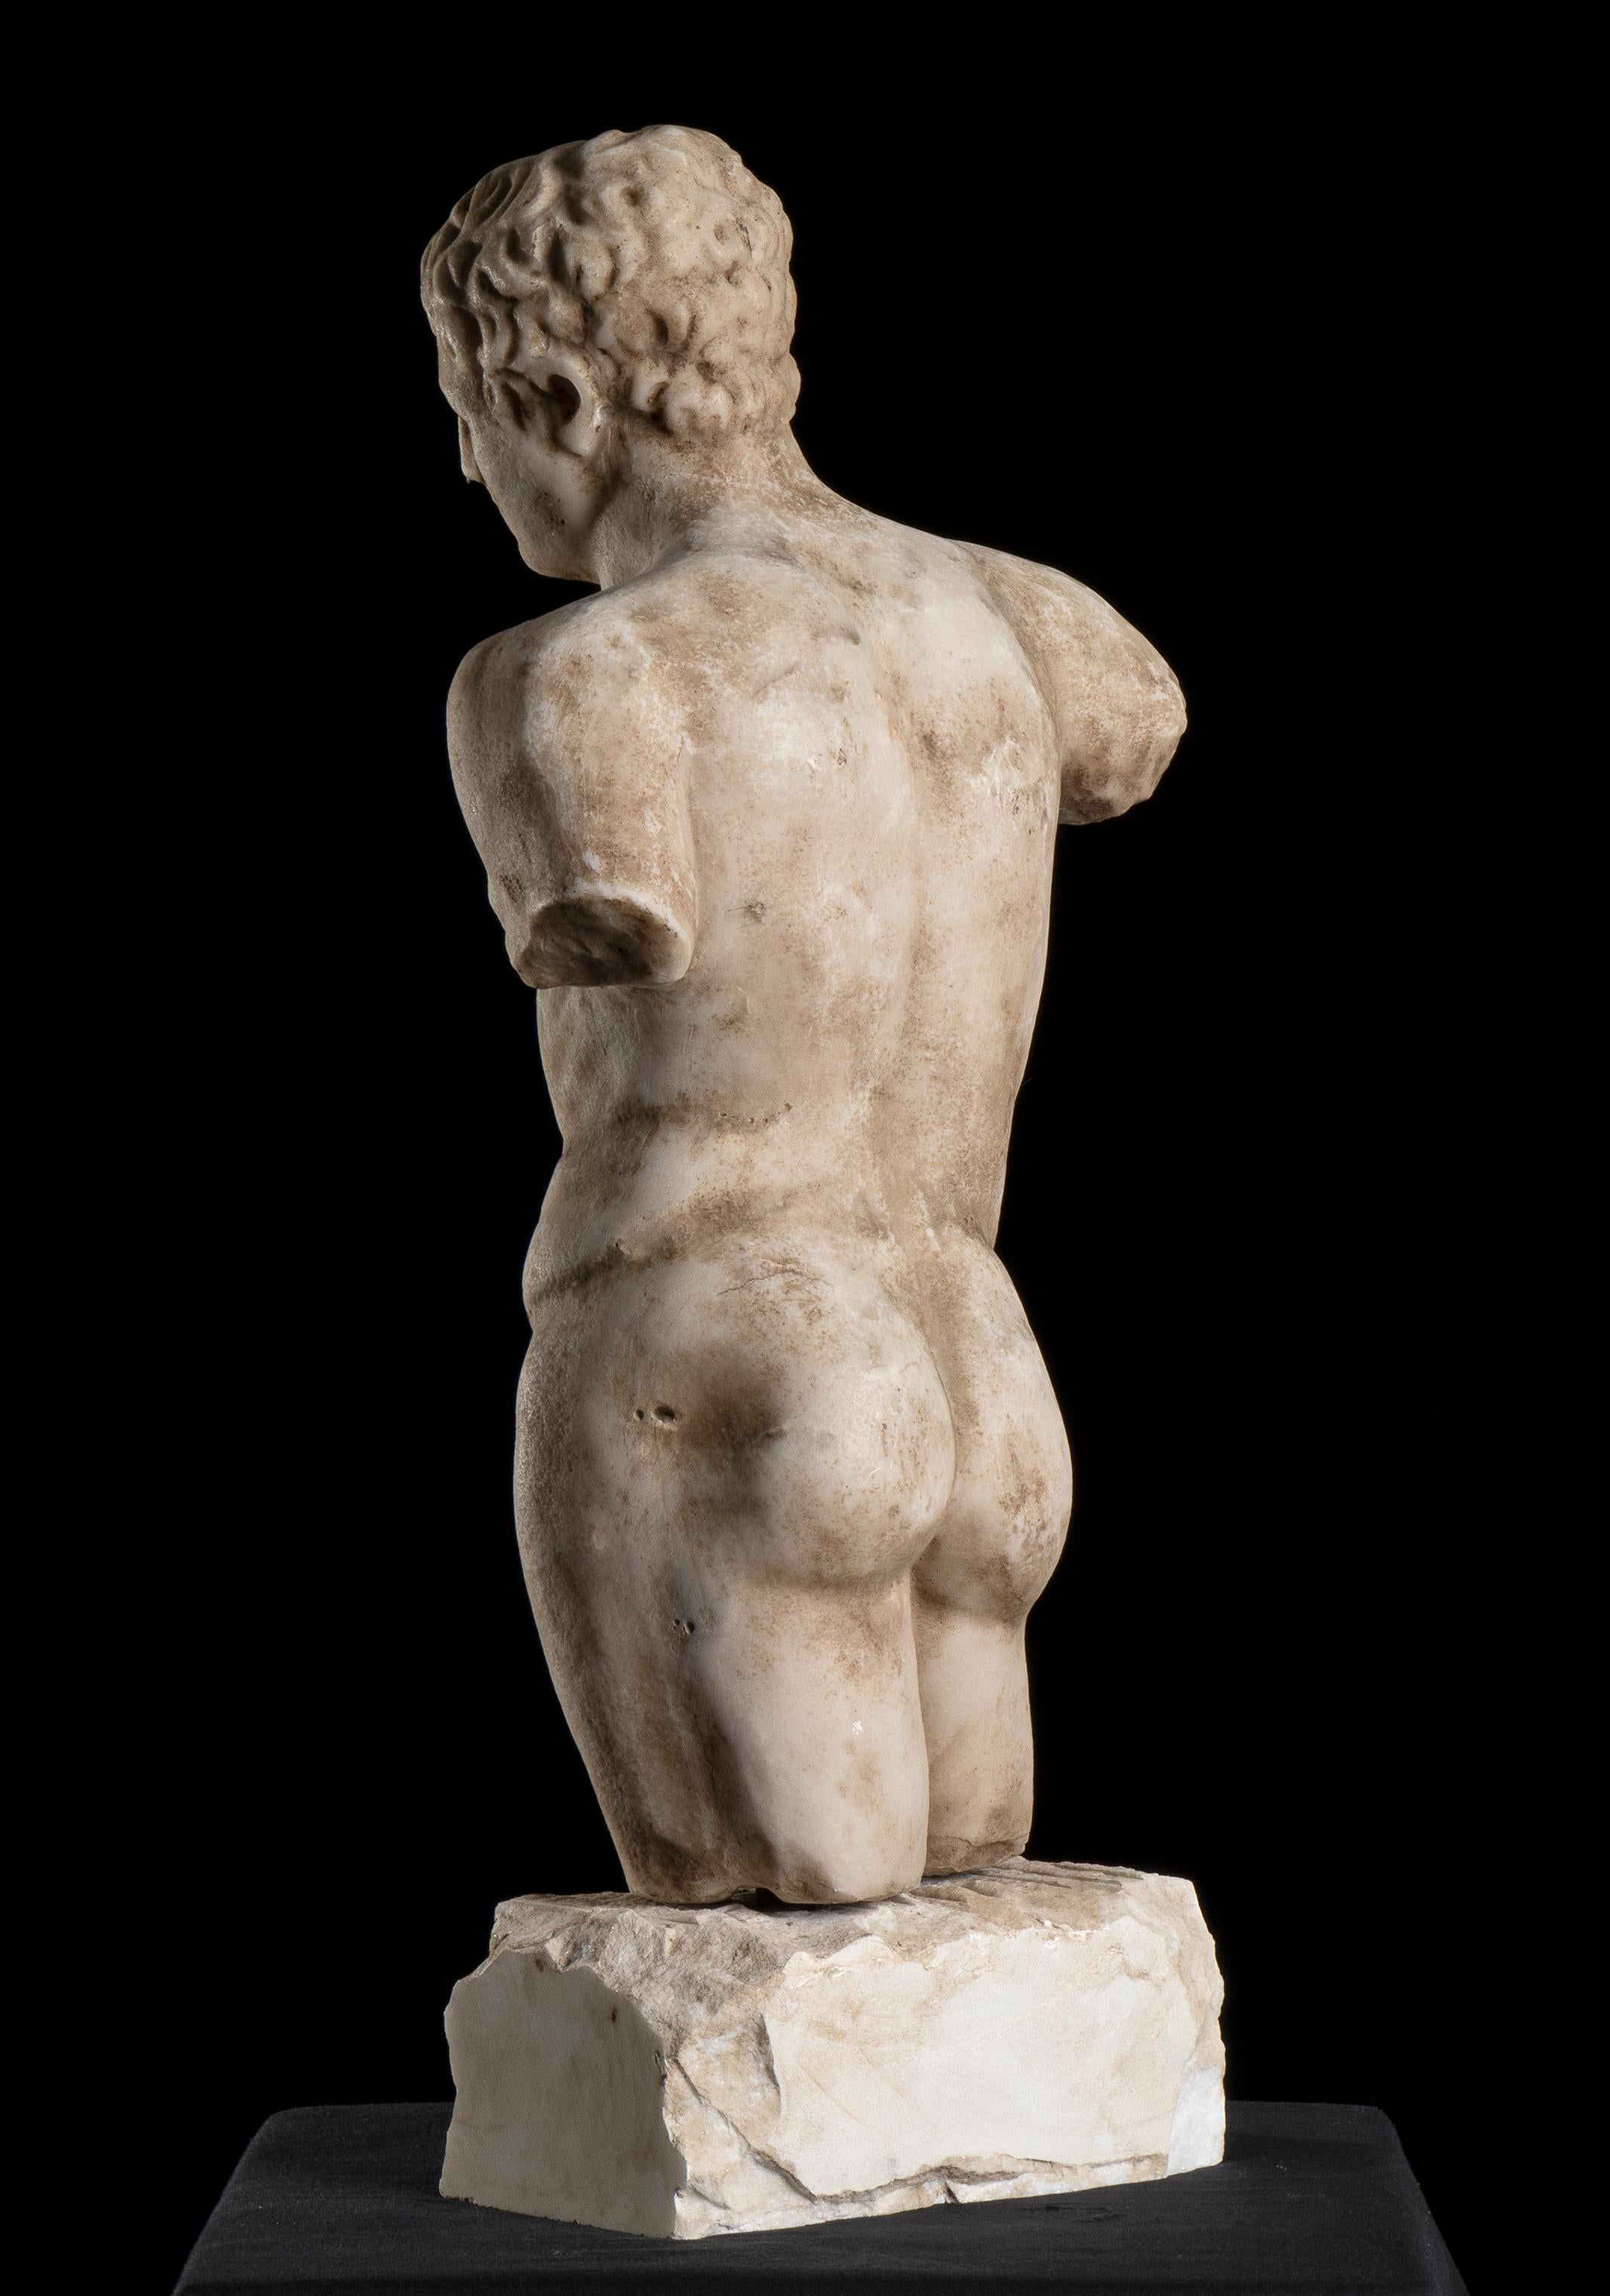 a very beautiful sculpture of Doryphoros after the original by  Polykleitos, that was  one of the best known Greek sculptures of classical antiquity, depicting a solidly built, muscular, standing warrior, originally bearing a spear balanced on his